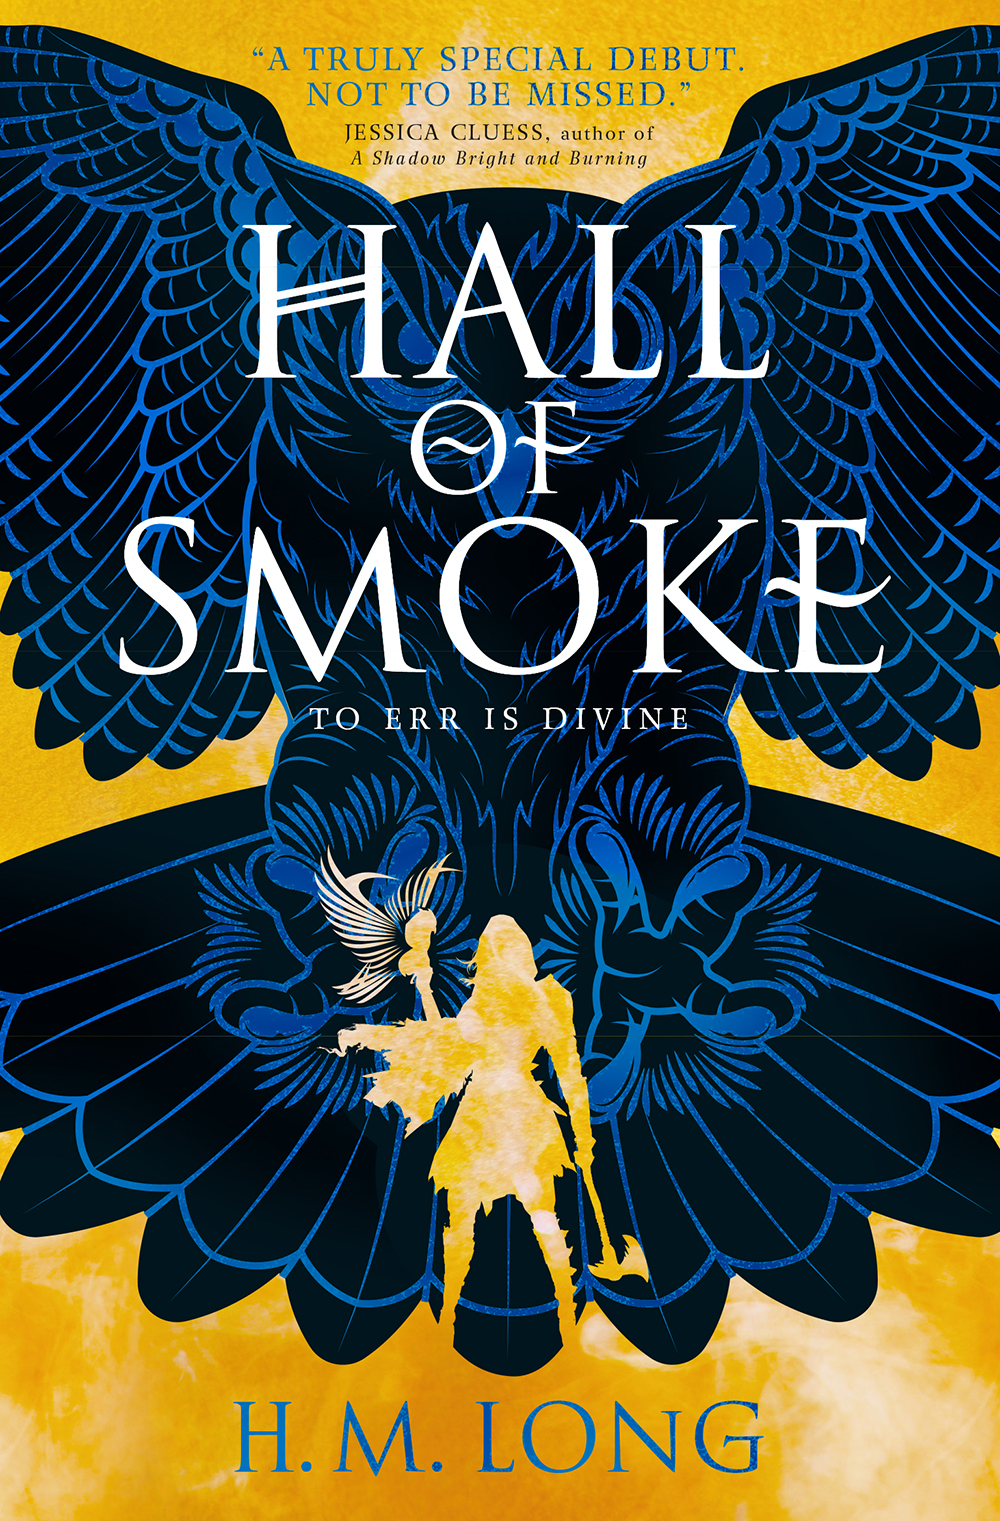 Cover for Hall of Smoke by H. M. Long